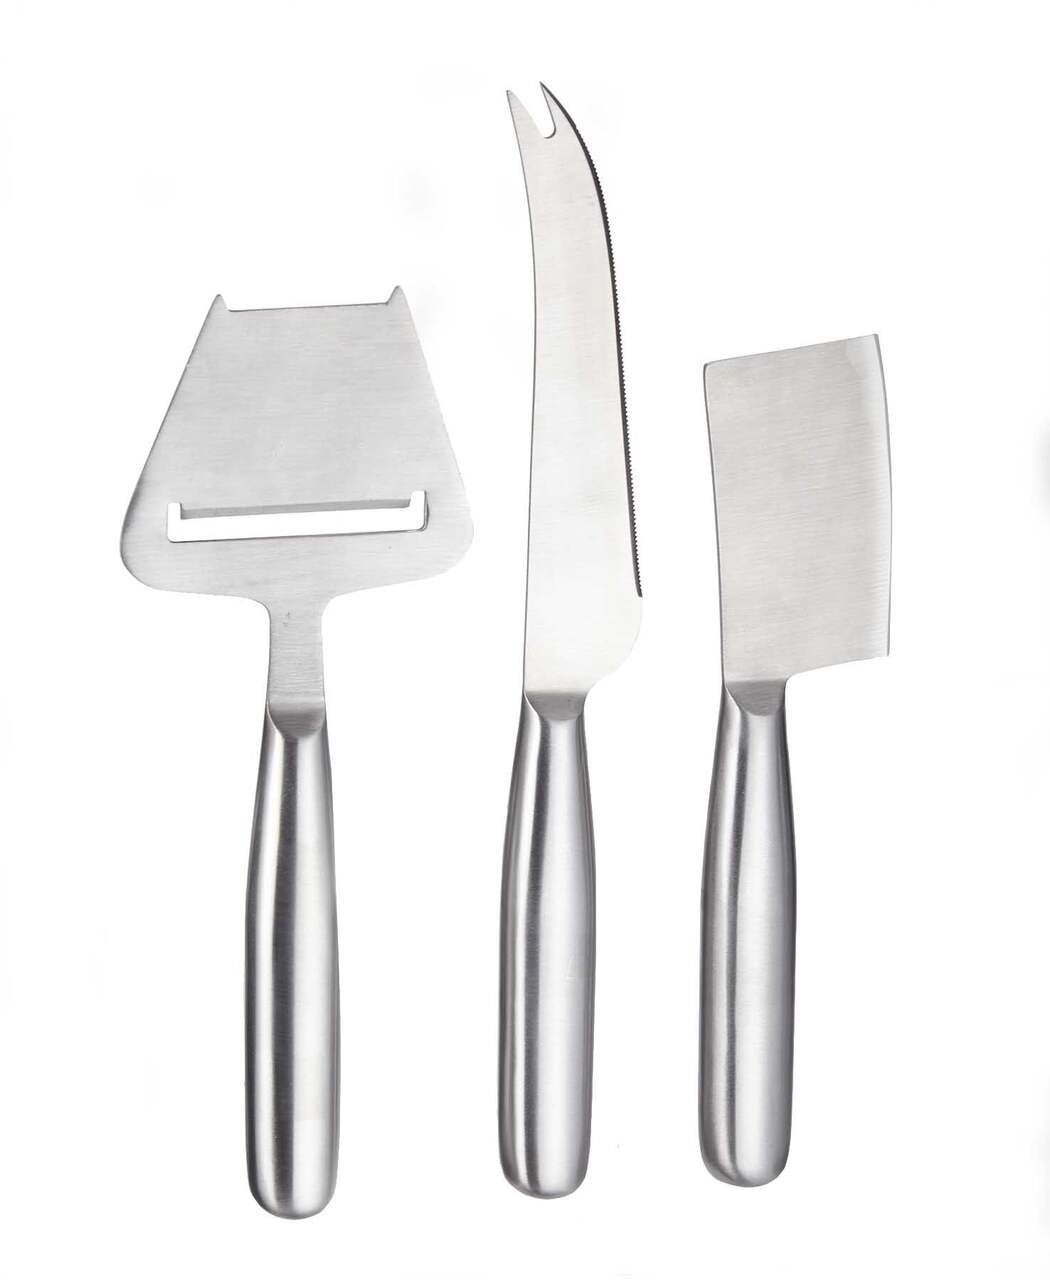 https://media-www.canadiantire.ca/product/living/kitchen/dining-and-entertaining/1422920/canvas-cheese-knife-set-with-stainless-steel-handels-94955a96-be12-4f32-99c4-beff40450a5c-jpgrendition.jpg?imdensity=1&imwidth=640&impolicy=mZoom